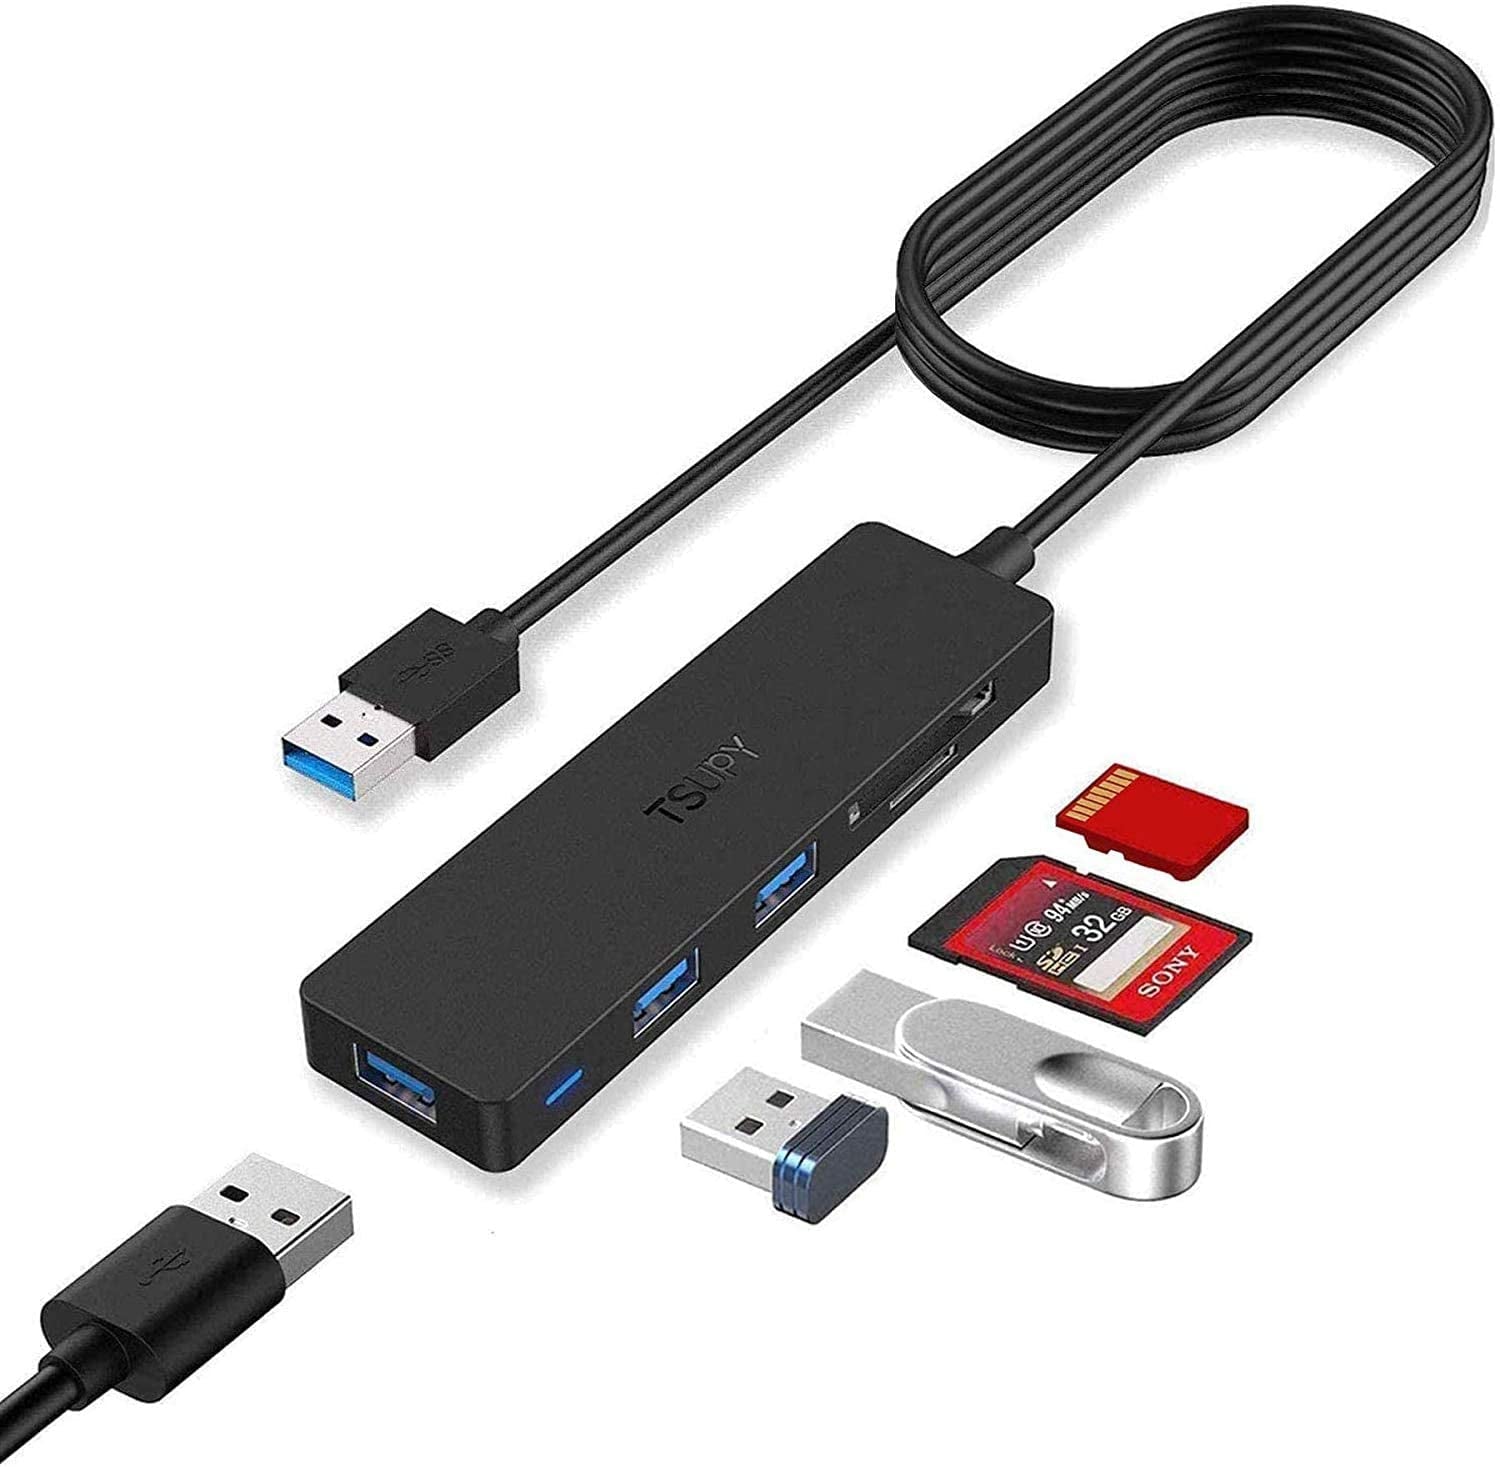 USB Hub 3.0 Splitter,  USB 3.0 Hub Multi USB Adapter Port Expander with 4Ft Cable, SD/TF Card Reader & 3 USB 3.0 Ports Compatible for PC, Laptops, Surface Pro, Macbook, Imac Pro